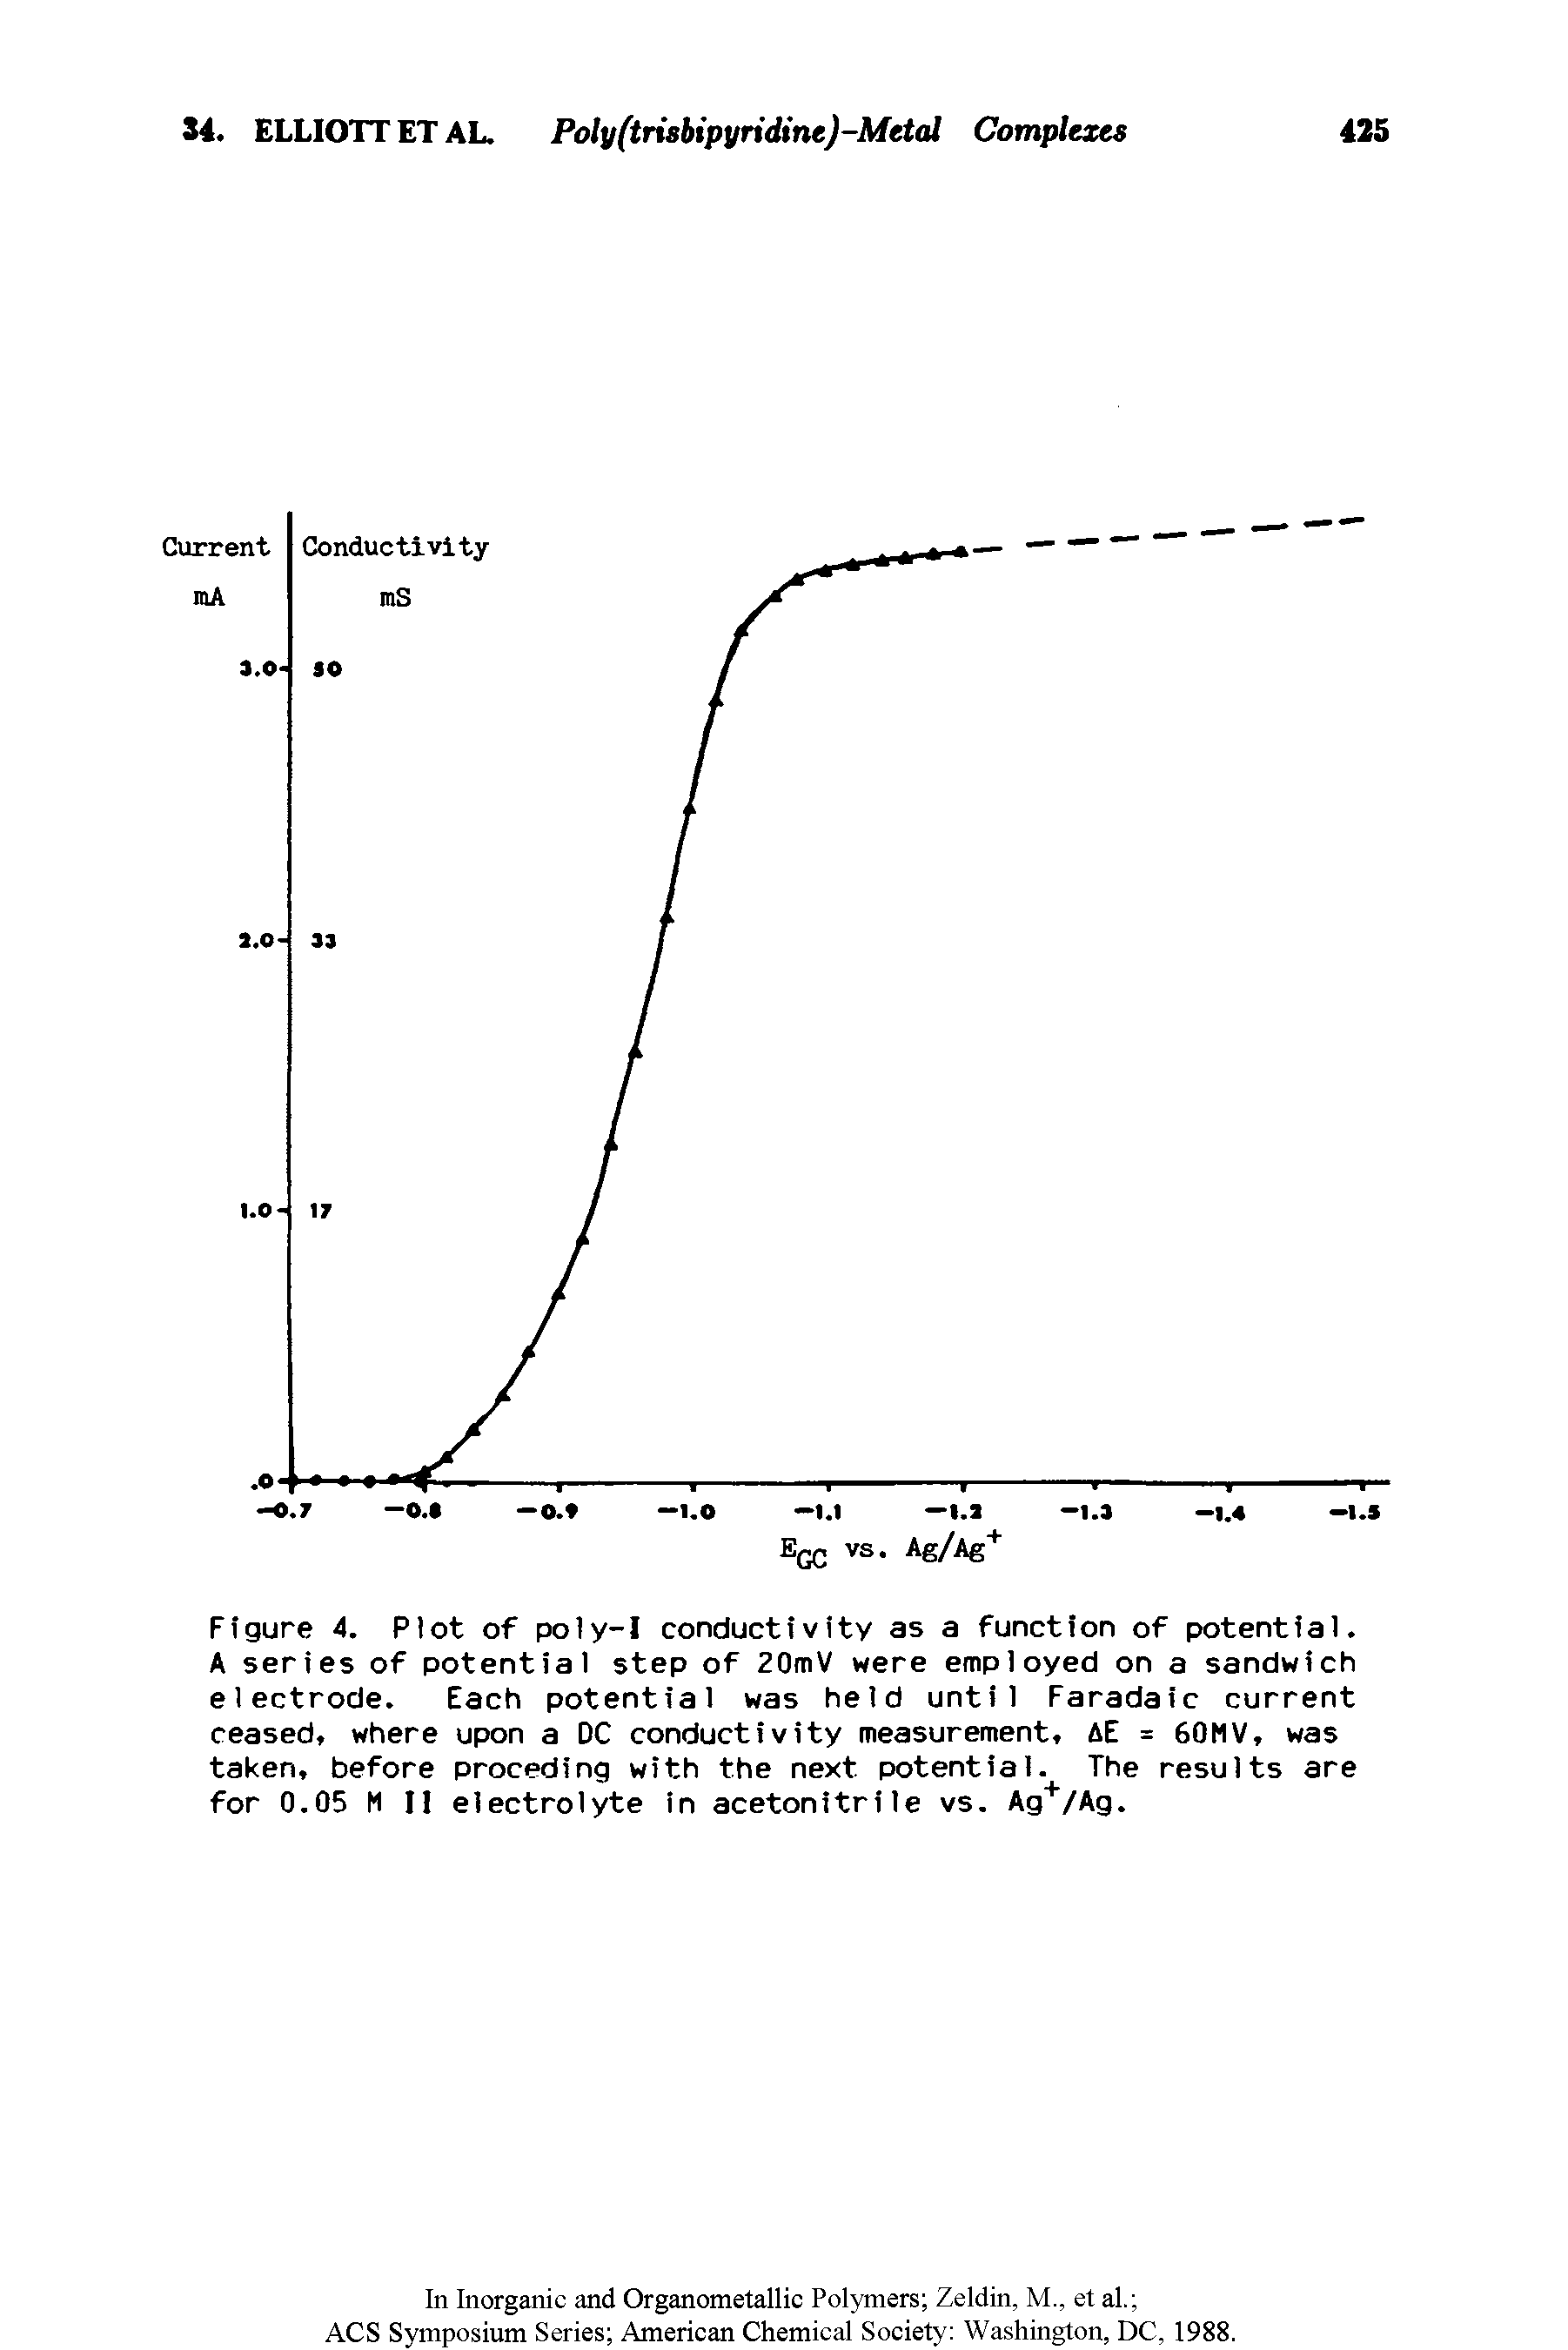 Figure 4. Plot of poly-I conductivity as a function of potential. A series of potential step of 20mV were employed on a sandwich electrode. Each potential was held until Faradaic current ceased, where upon a DC conductivity measurement, AE = 60MV, was taken, before proceding with the next potential. The results are for 0.05 M II electrolyte in acetonitrile vs. Ag+/Ag.